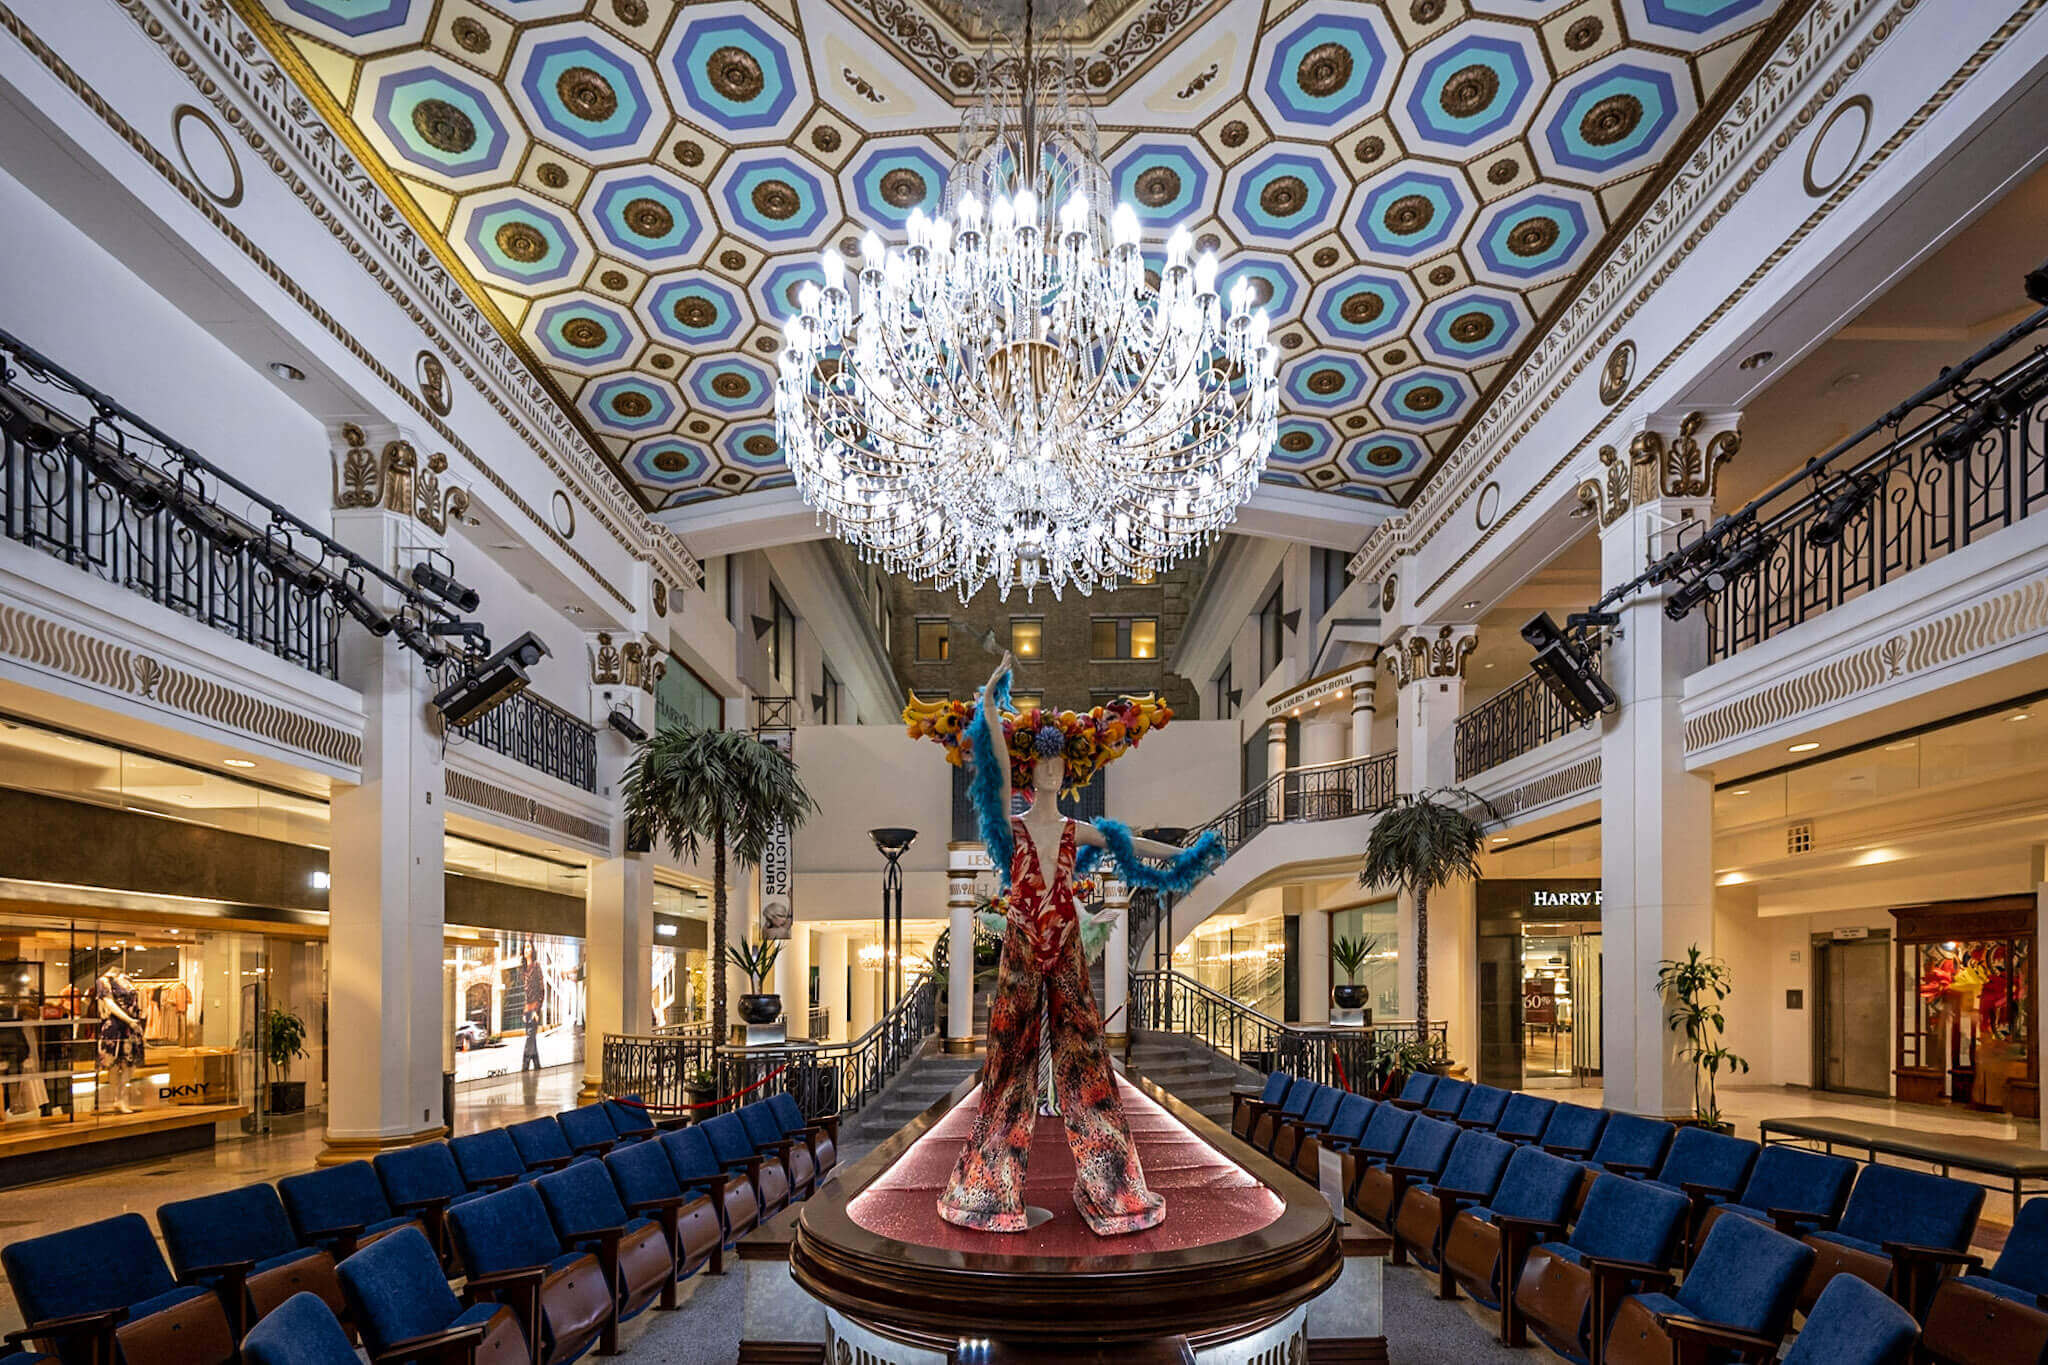 The former hotel lobby and grand chandelier in Les Cours Mont-Royal